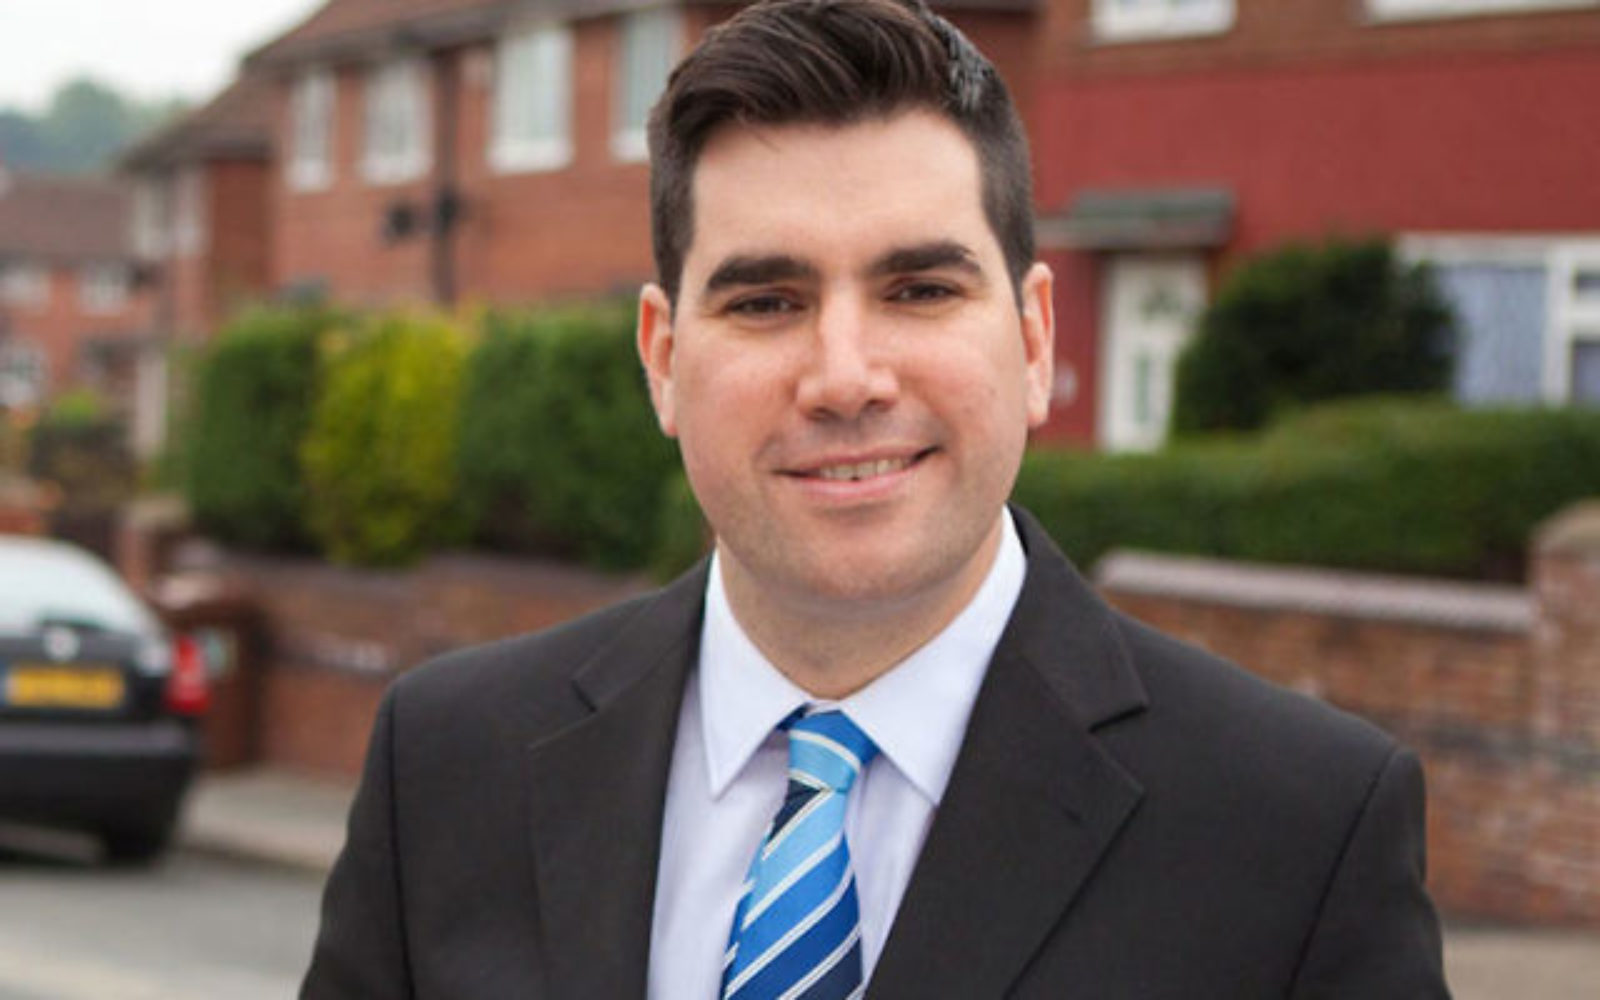 Richard Burgon this photo is licensed under a Creative Commons Attribution 4.0 License, meaning it can be used freely with attribution.